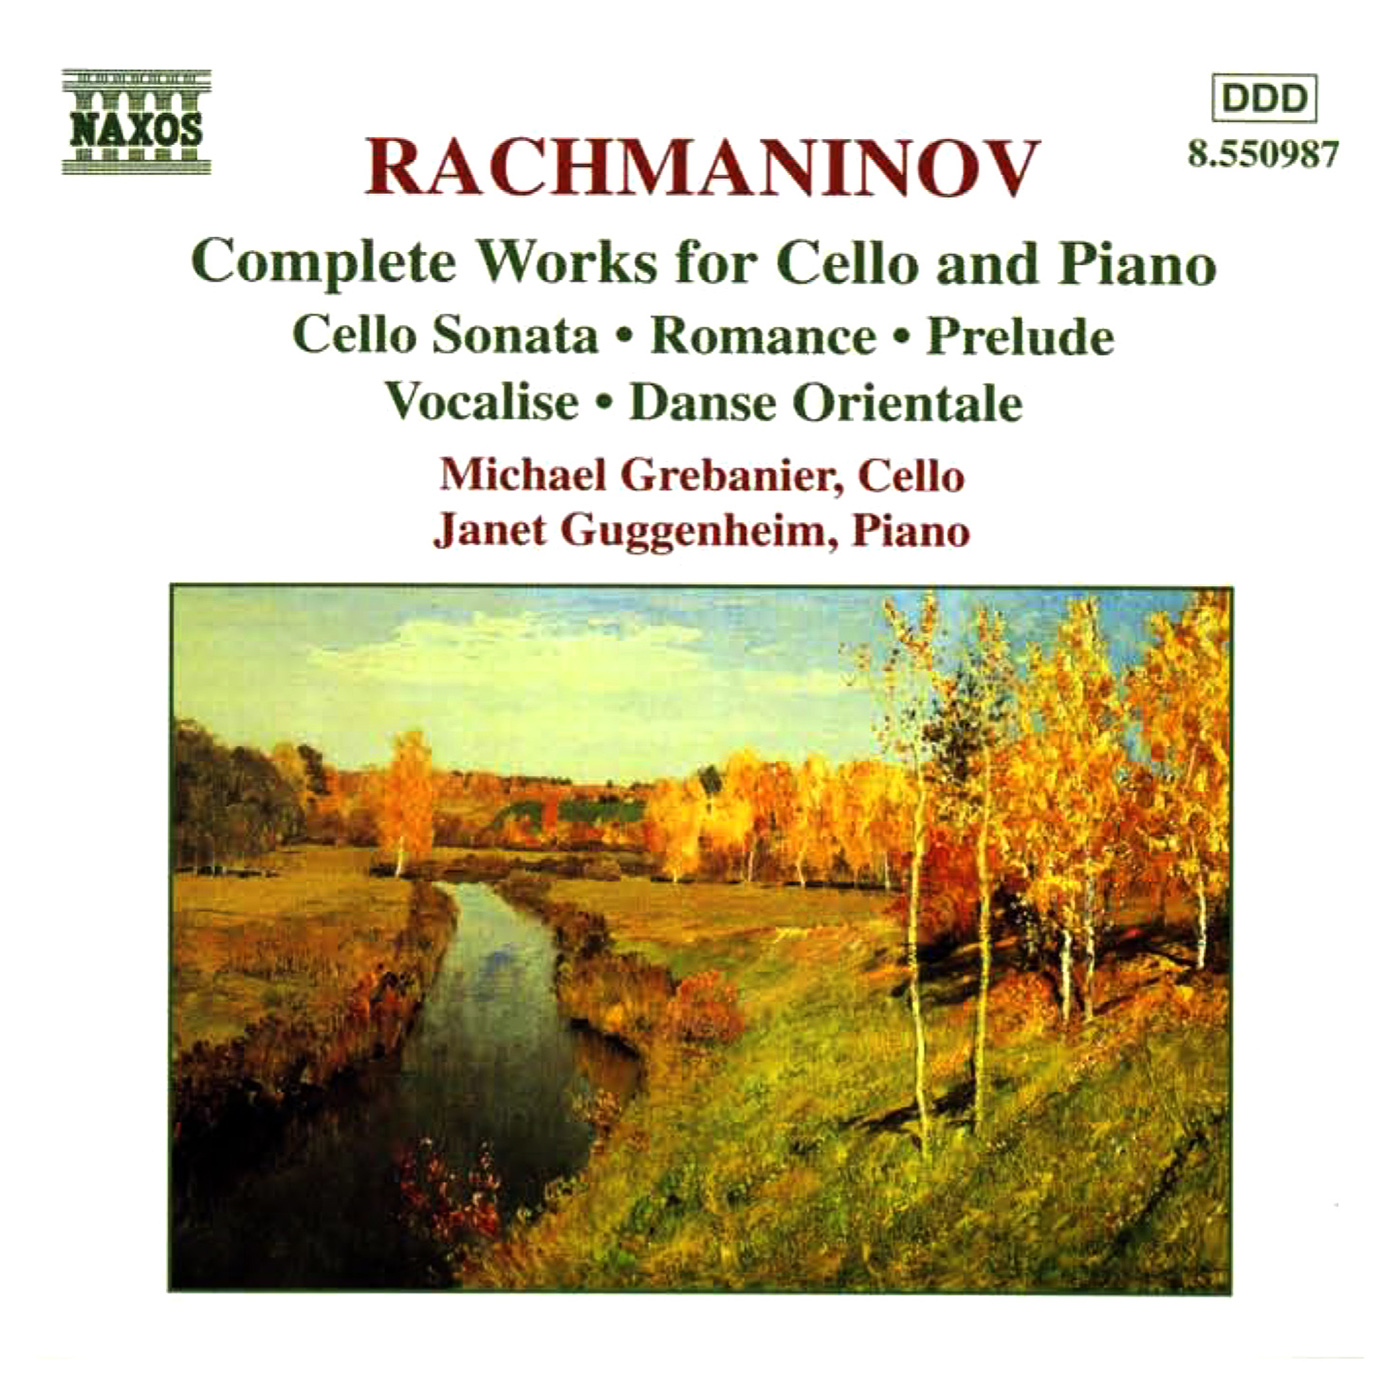 RACHMANINOV: Works for Cello and Piano (Complete)